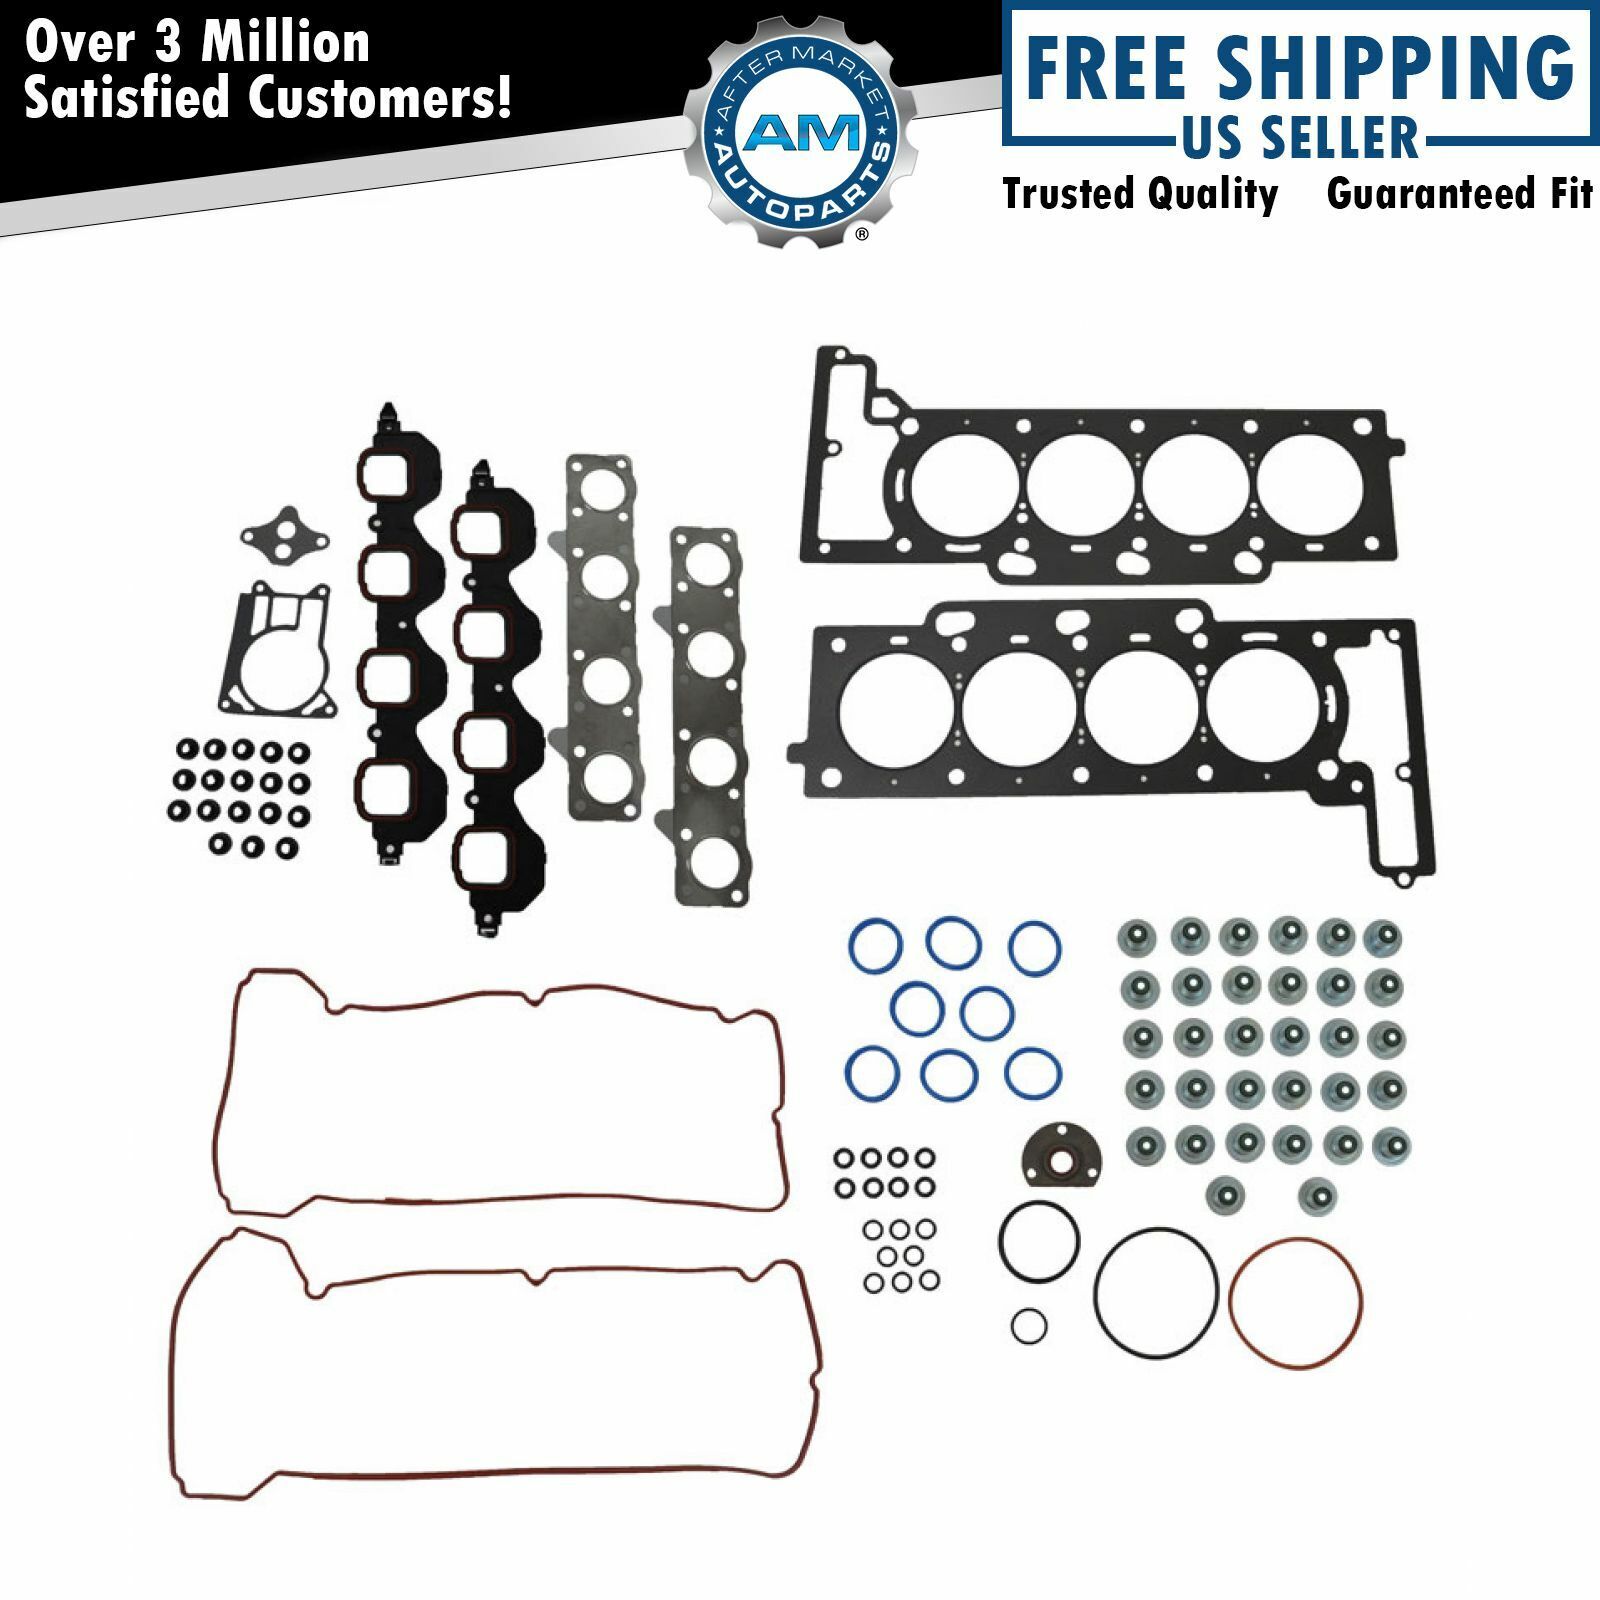 Engine Head Intake Exhaust Manifold Valve Cover Gasket Kit Set for Cadillac 4.6L